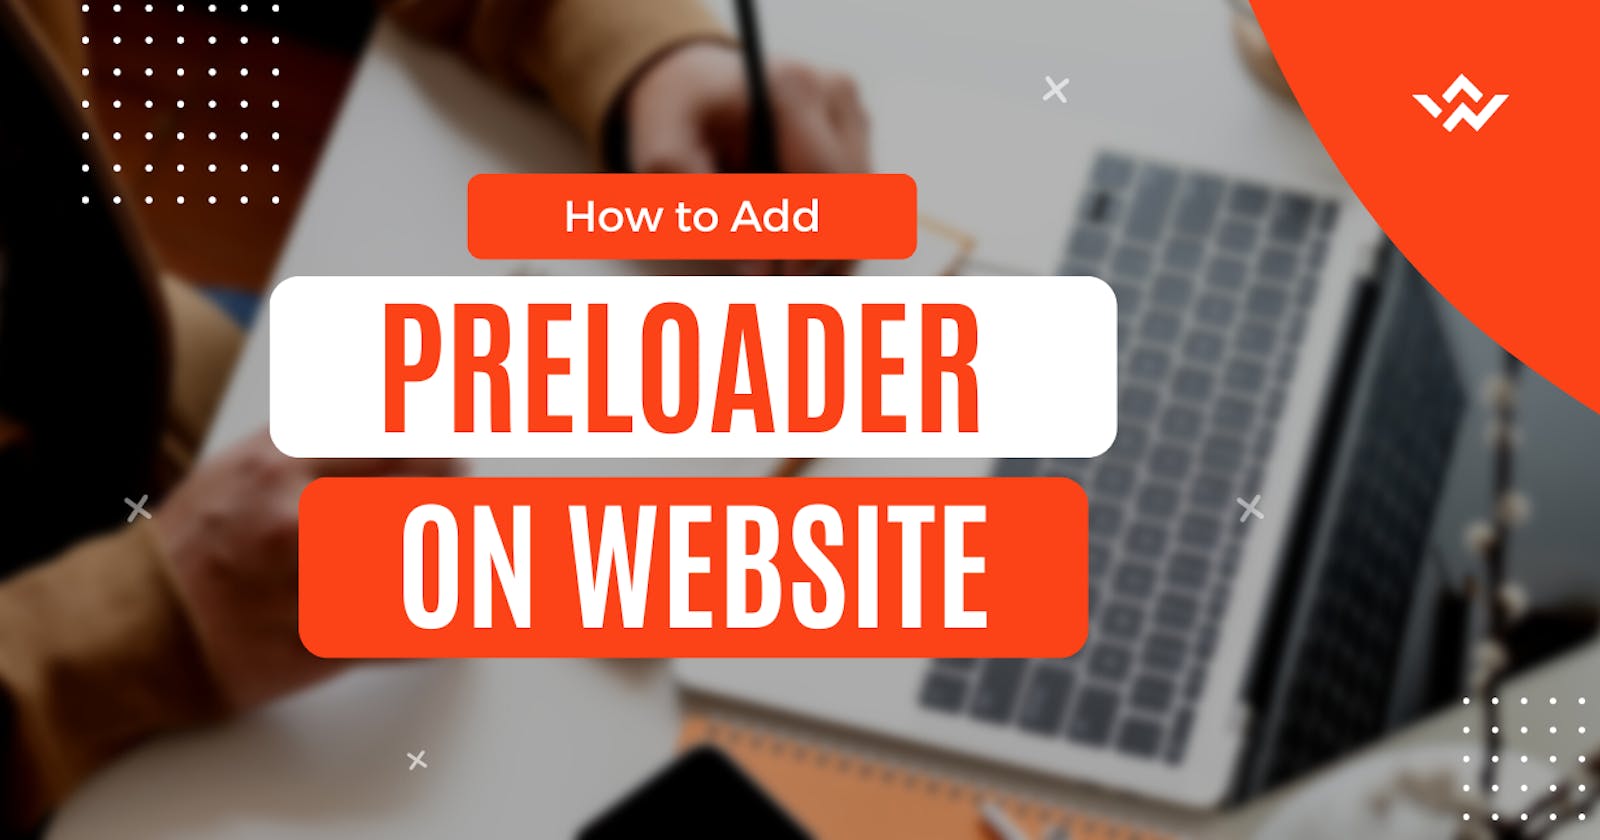 Add Pre-loader to website within 5 minutes